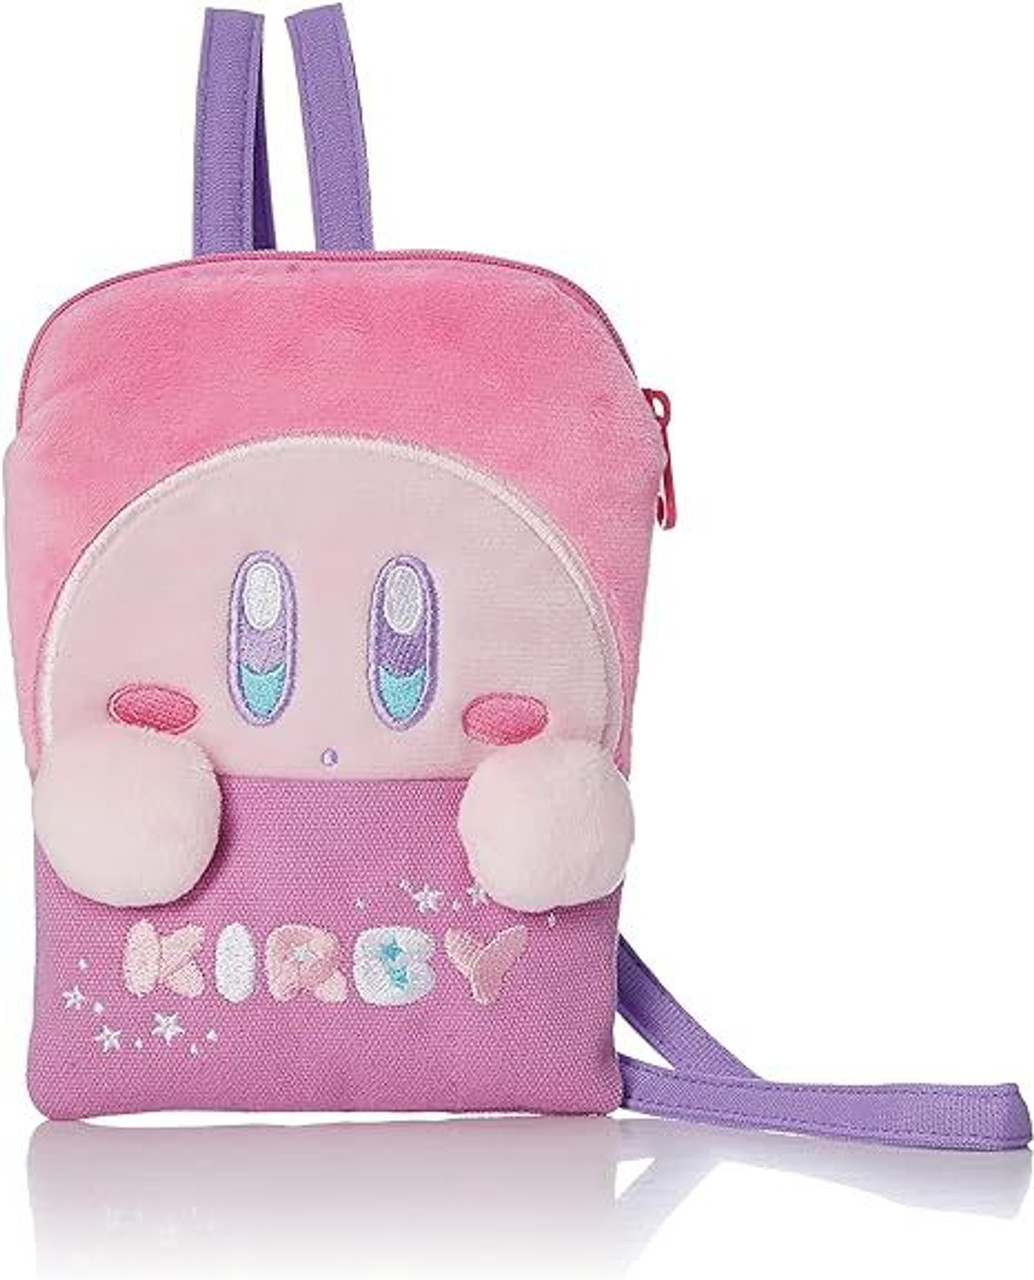 Kirby Shoulder Pouch - Sparkling Kirby